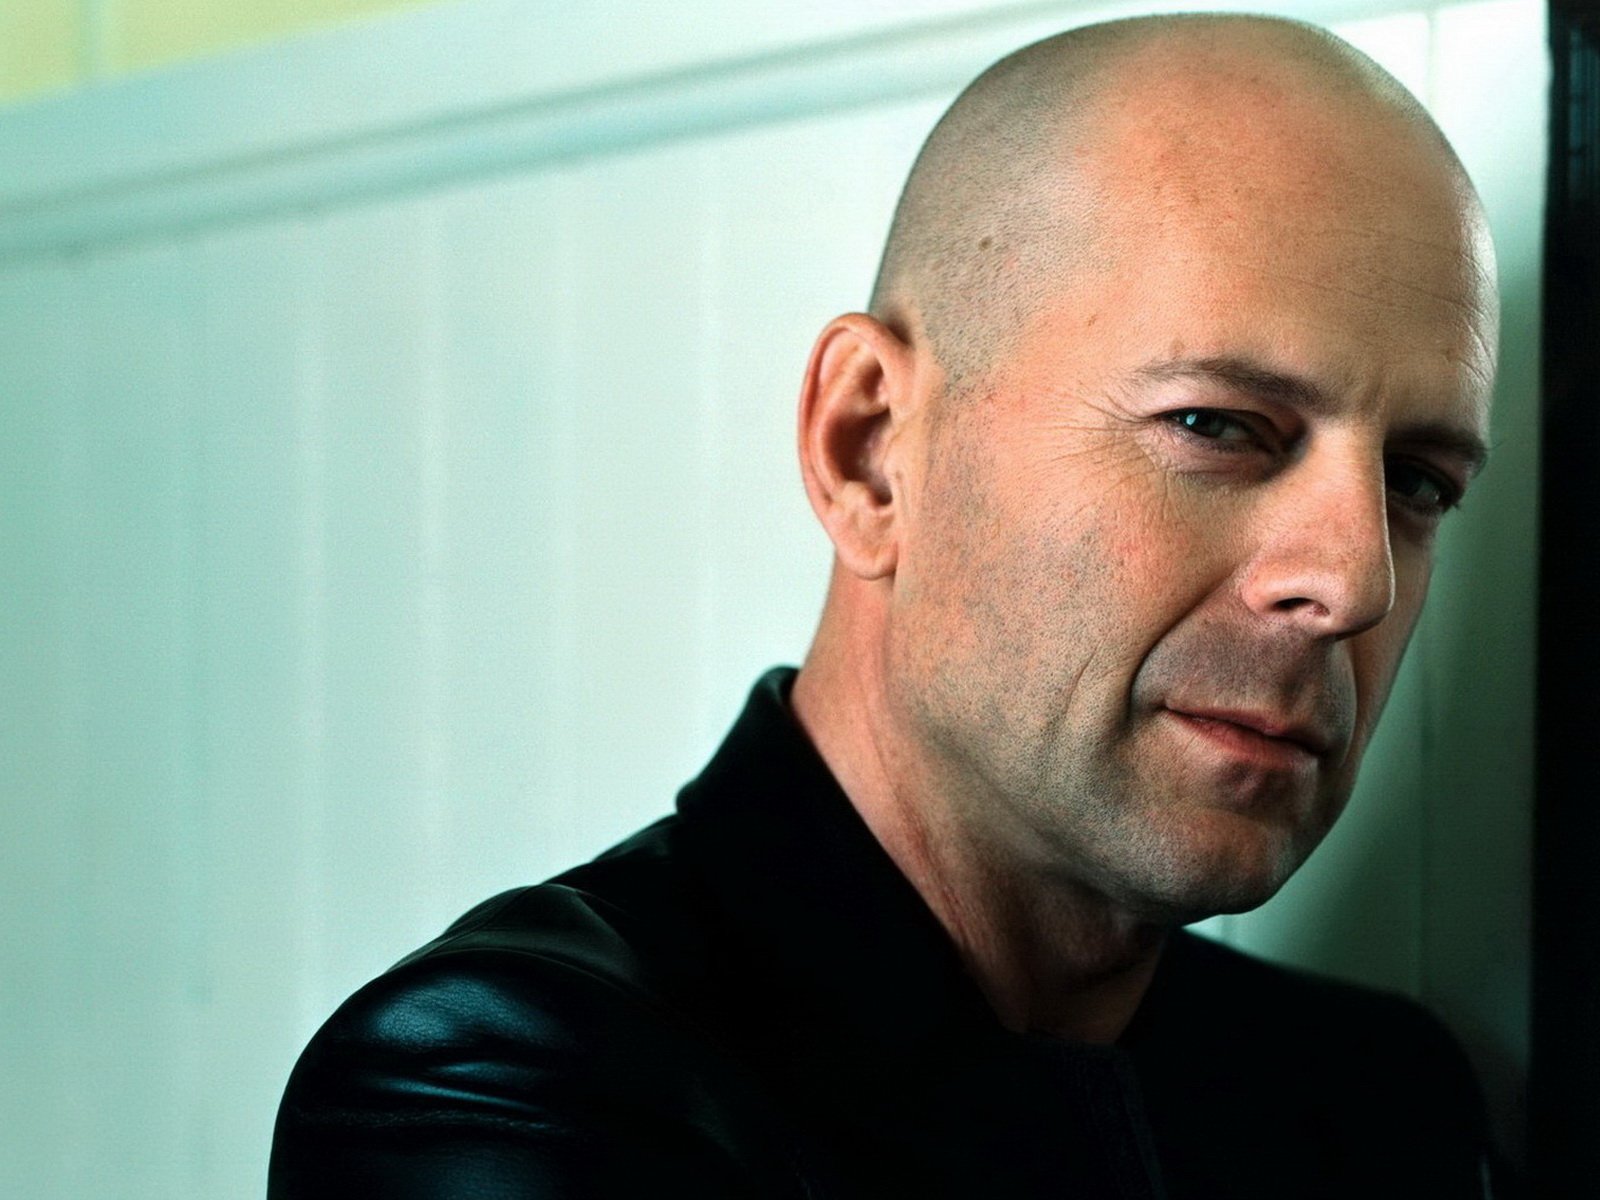 Bruce Willis Wallpapers High Resolution and Quality Download 1600x1200